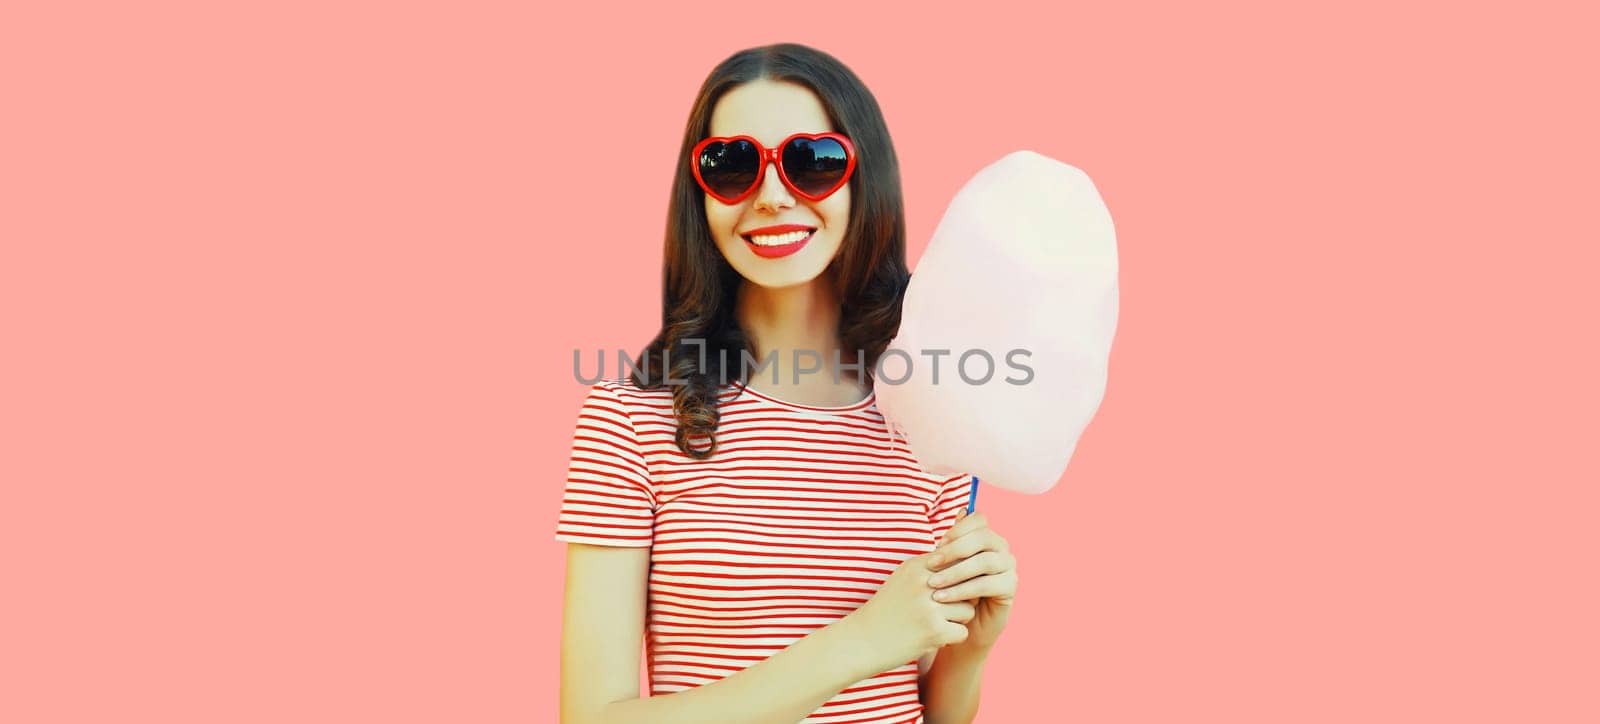 Portrait of happy smiling young woman with cotton candy wearing red heart shaped sunglasses on pink background